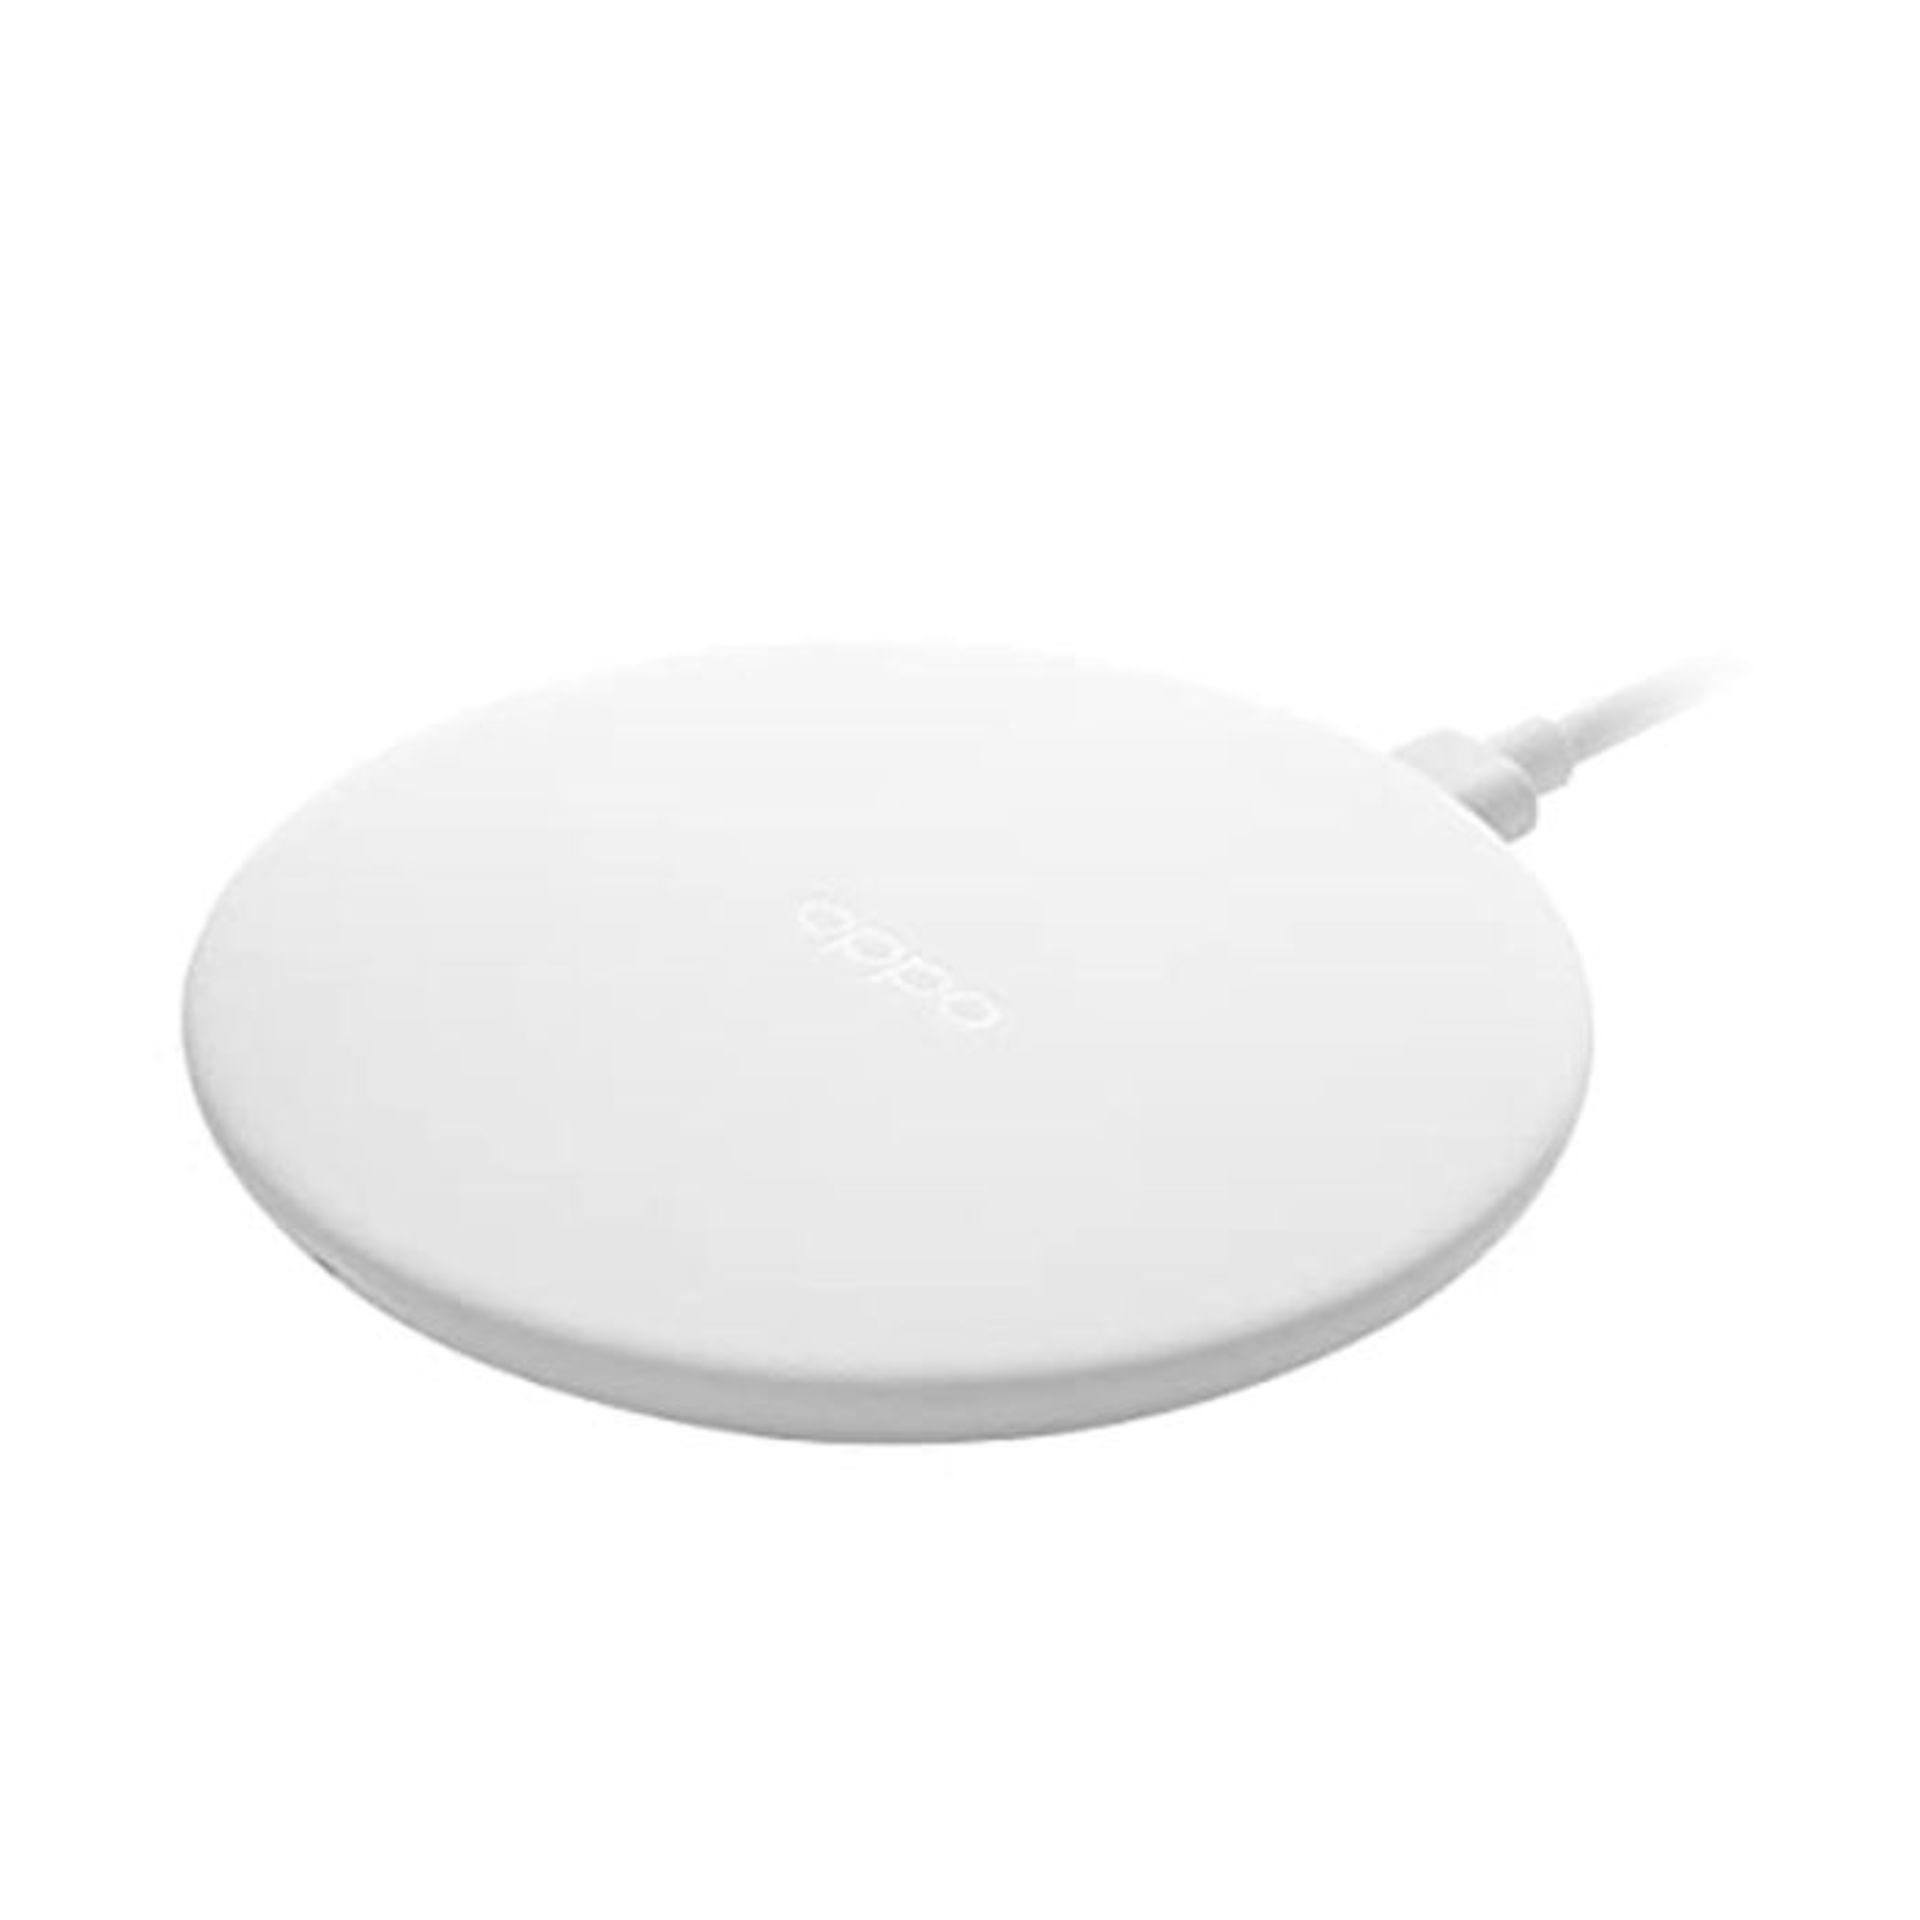 OPPO Original Wireless Charger for Smartphones and All Devices Wireless Charging, Powe